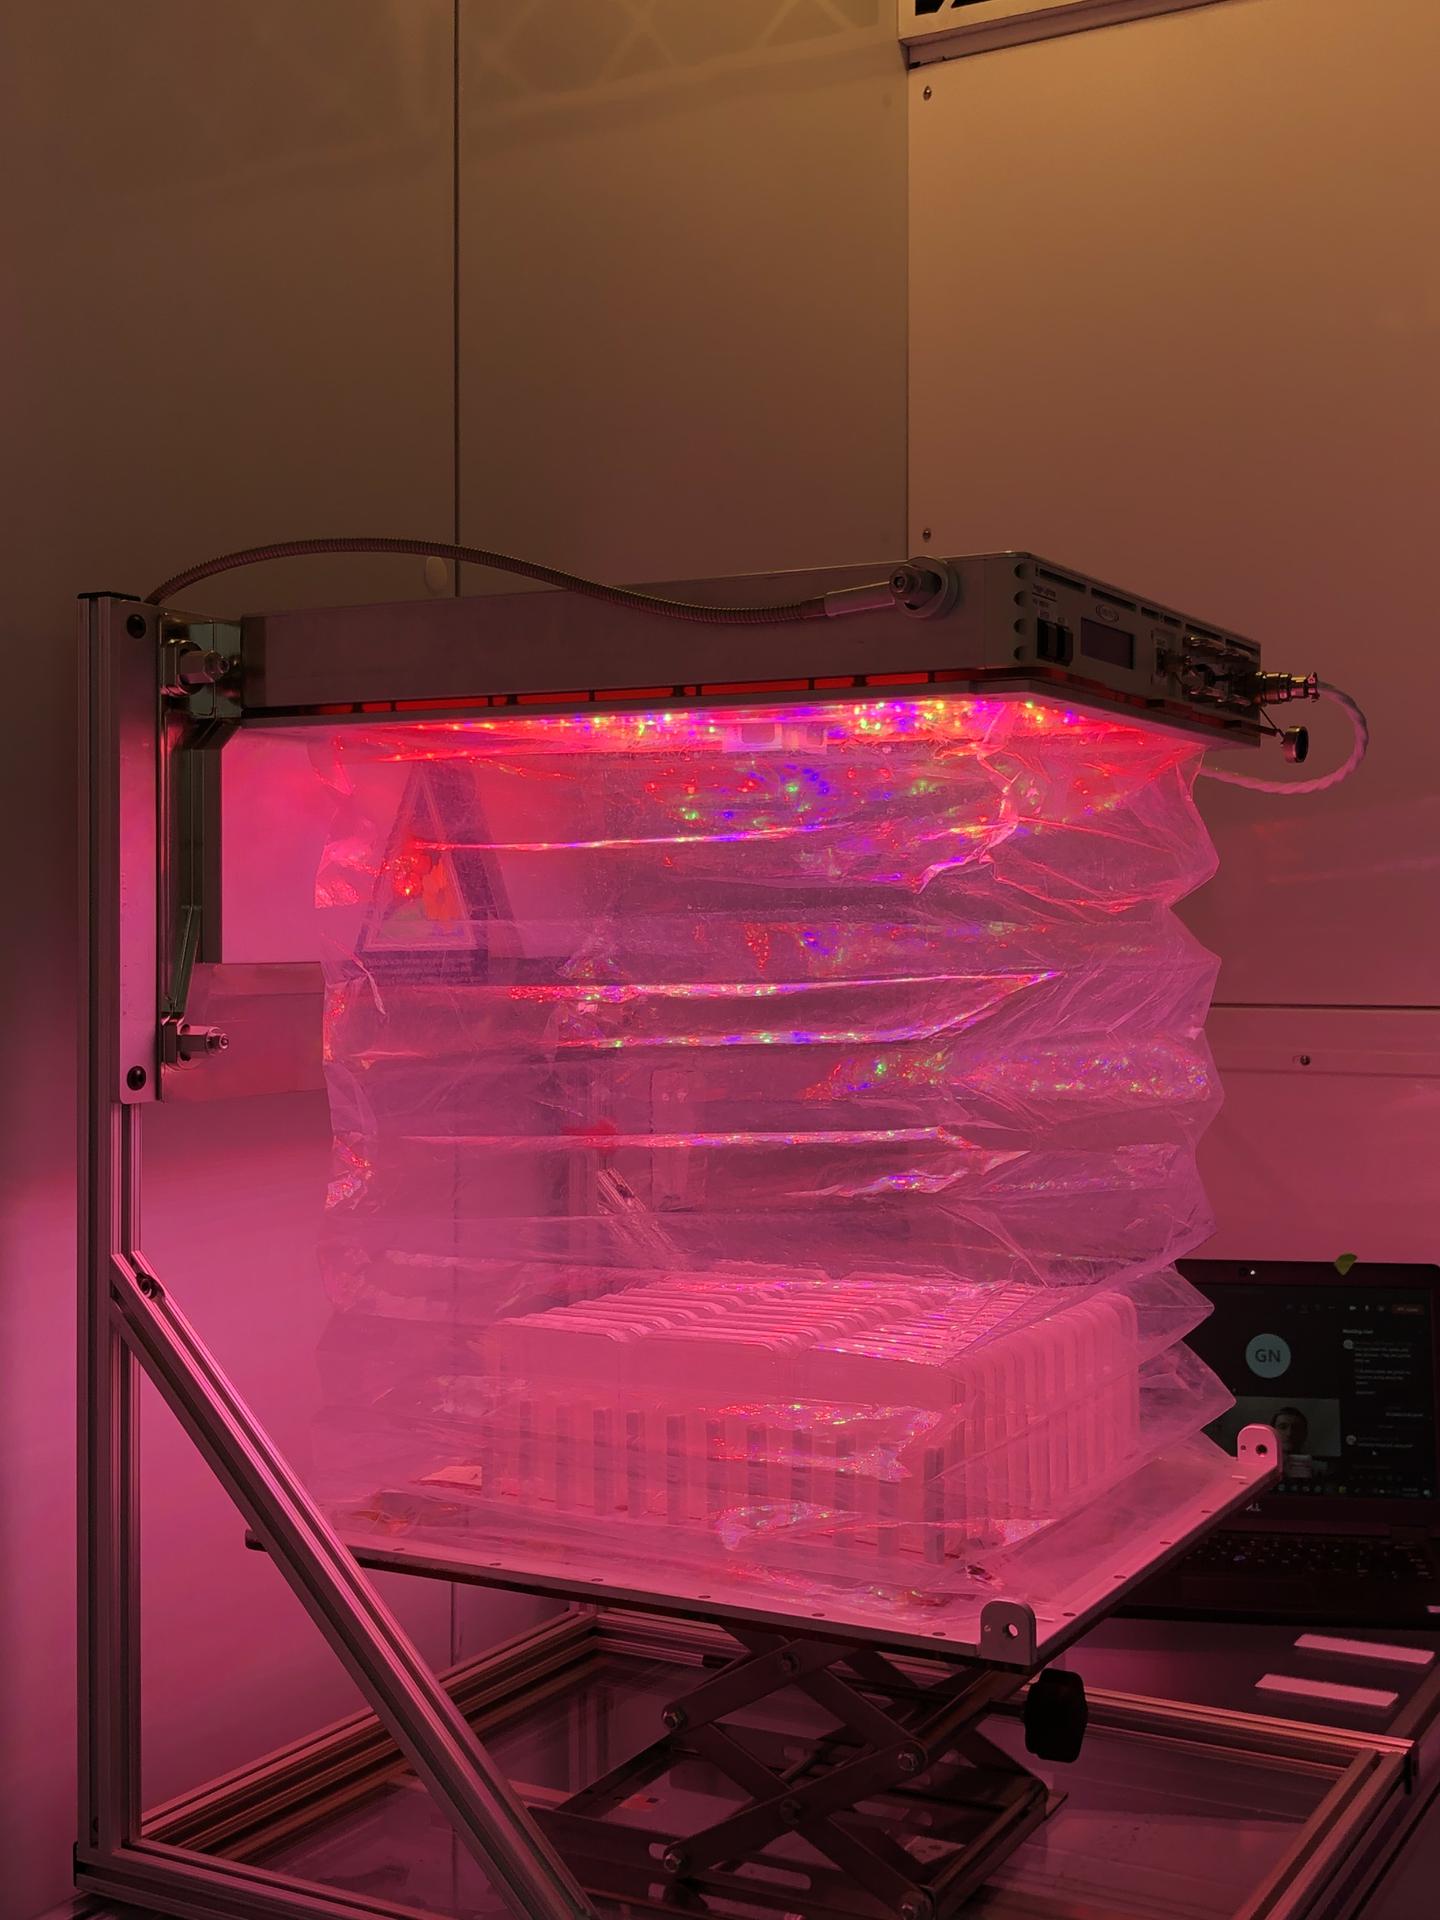 The Science Verification Test for NASA’s Advanced Plant Experiment-08 (APEX-08) takes place inside the Veggie growth chamber at NASA’s Kennedy Space Center in Florida on Nov. 6, 2020.